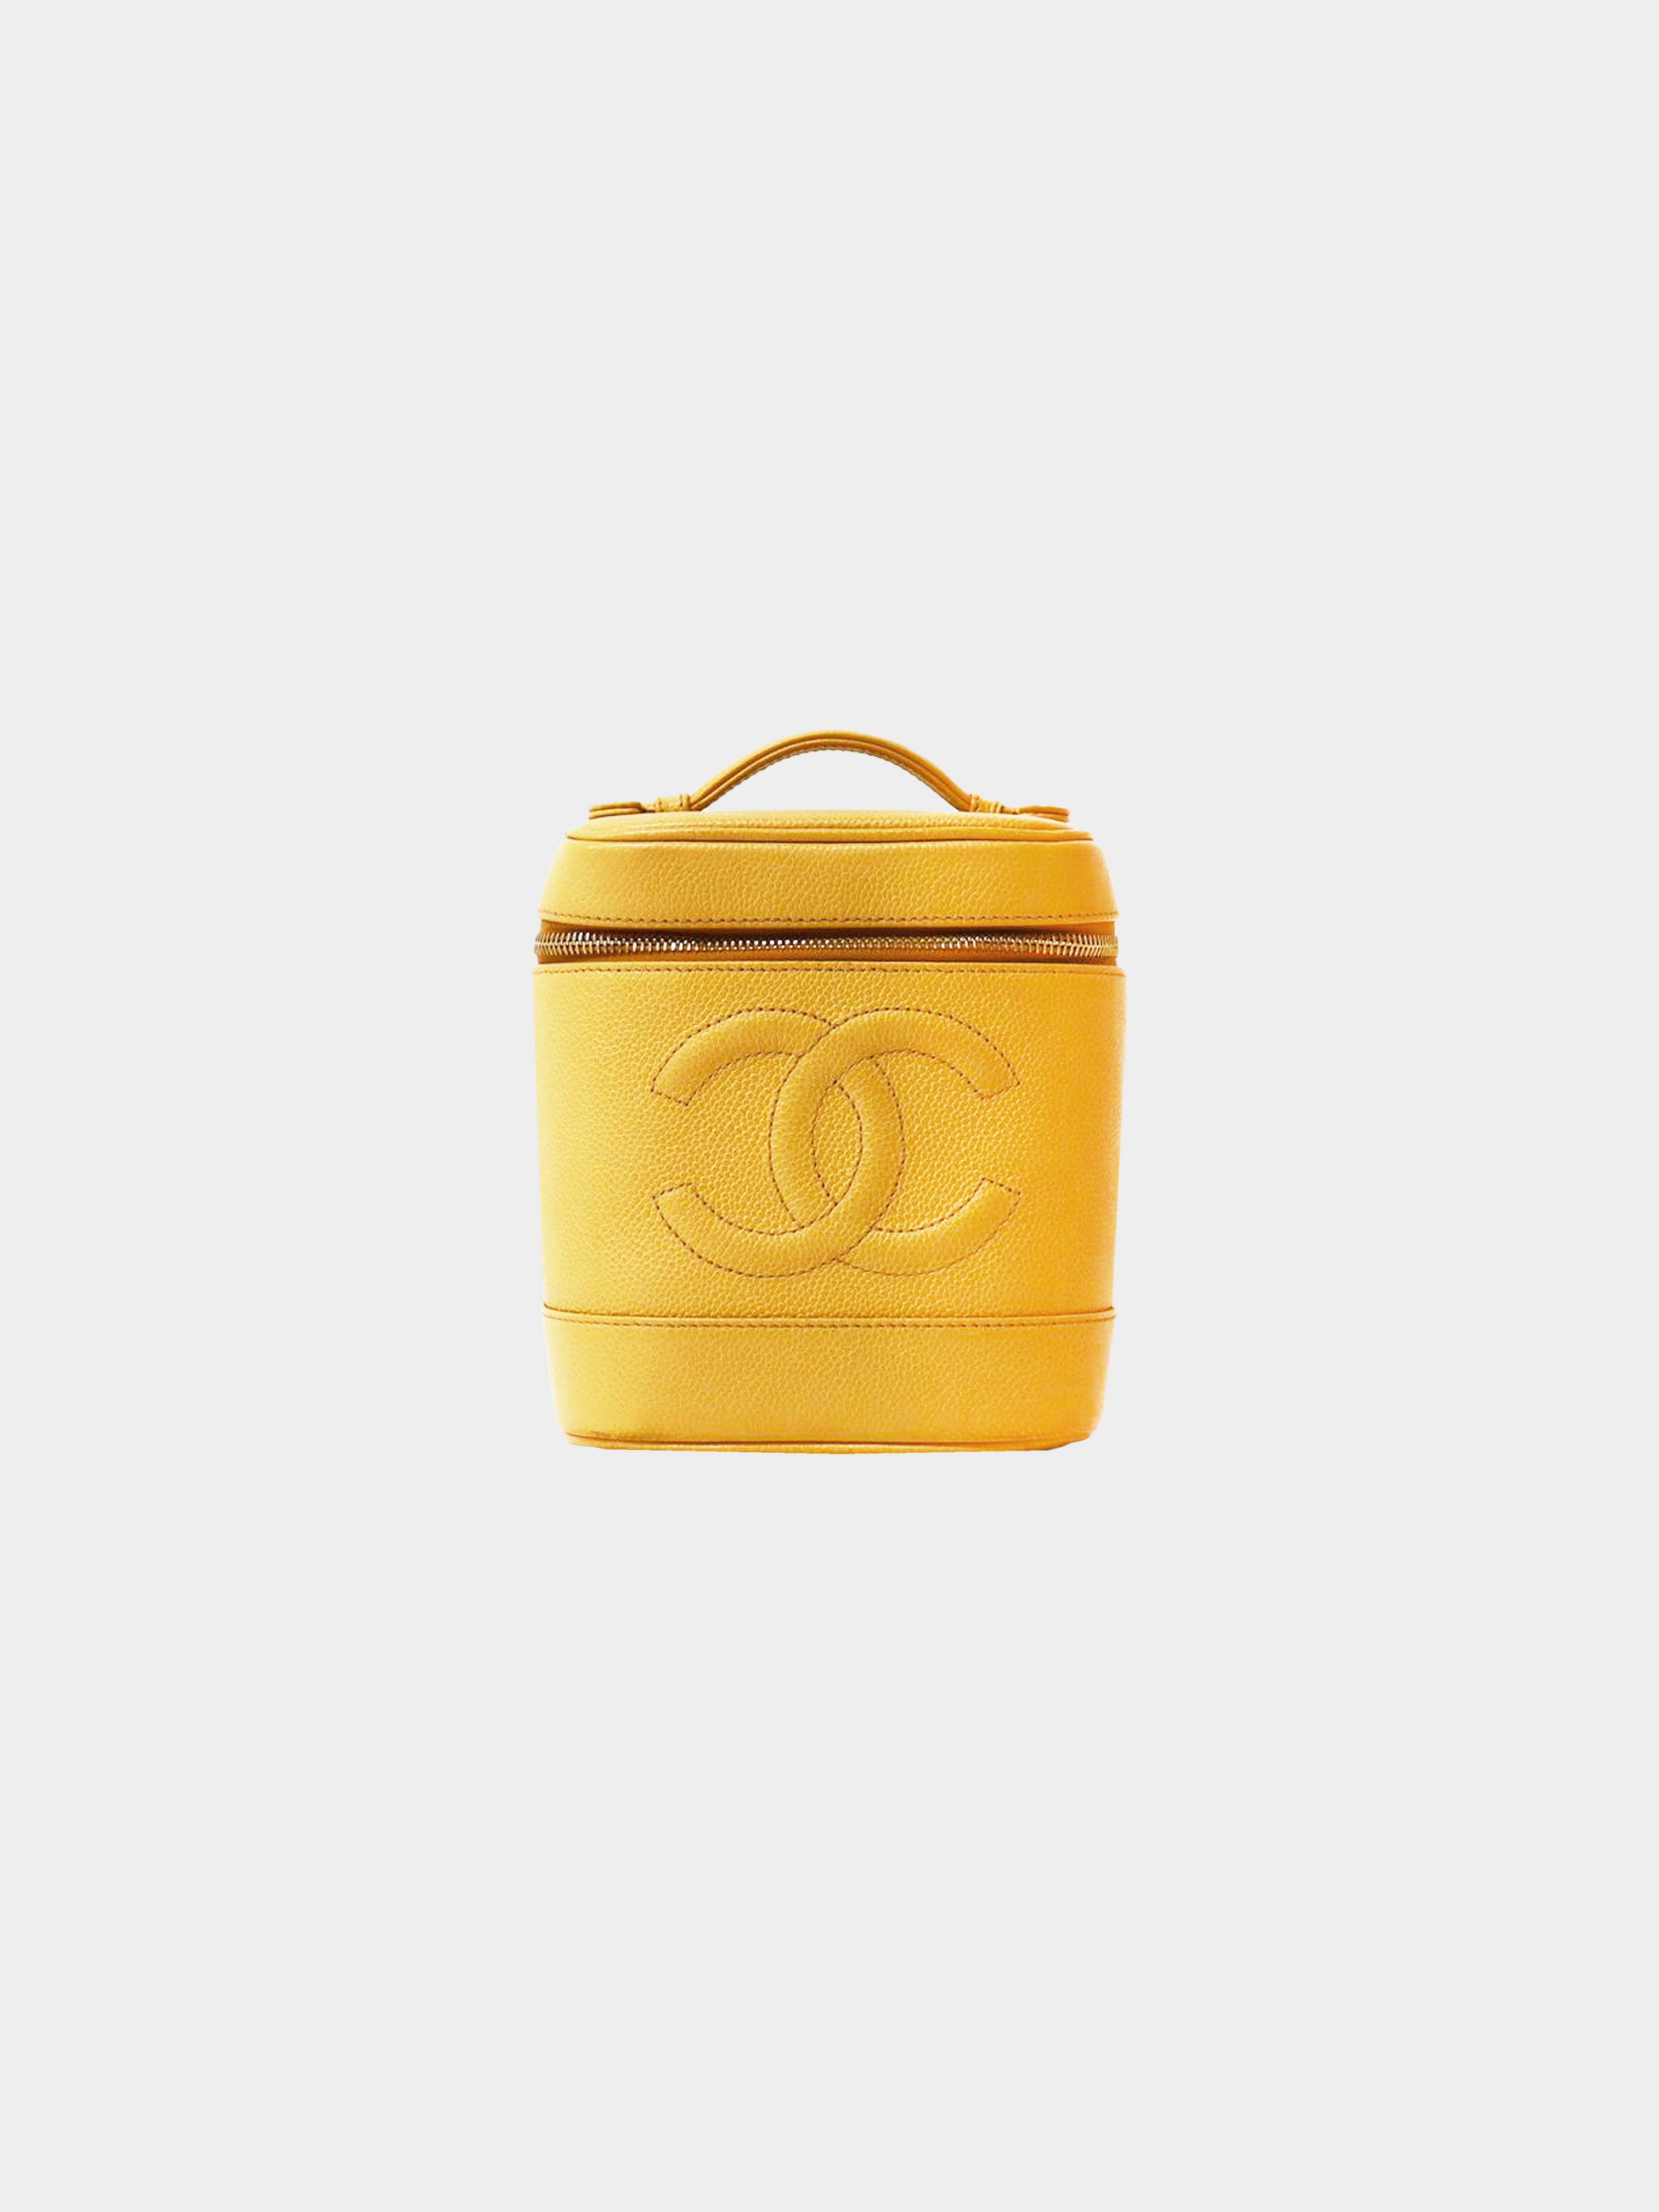 Auth Chanel Yellow Caviar Vintage CC Logo Cosmetic Pouch w/ gold hardware -  Rare